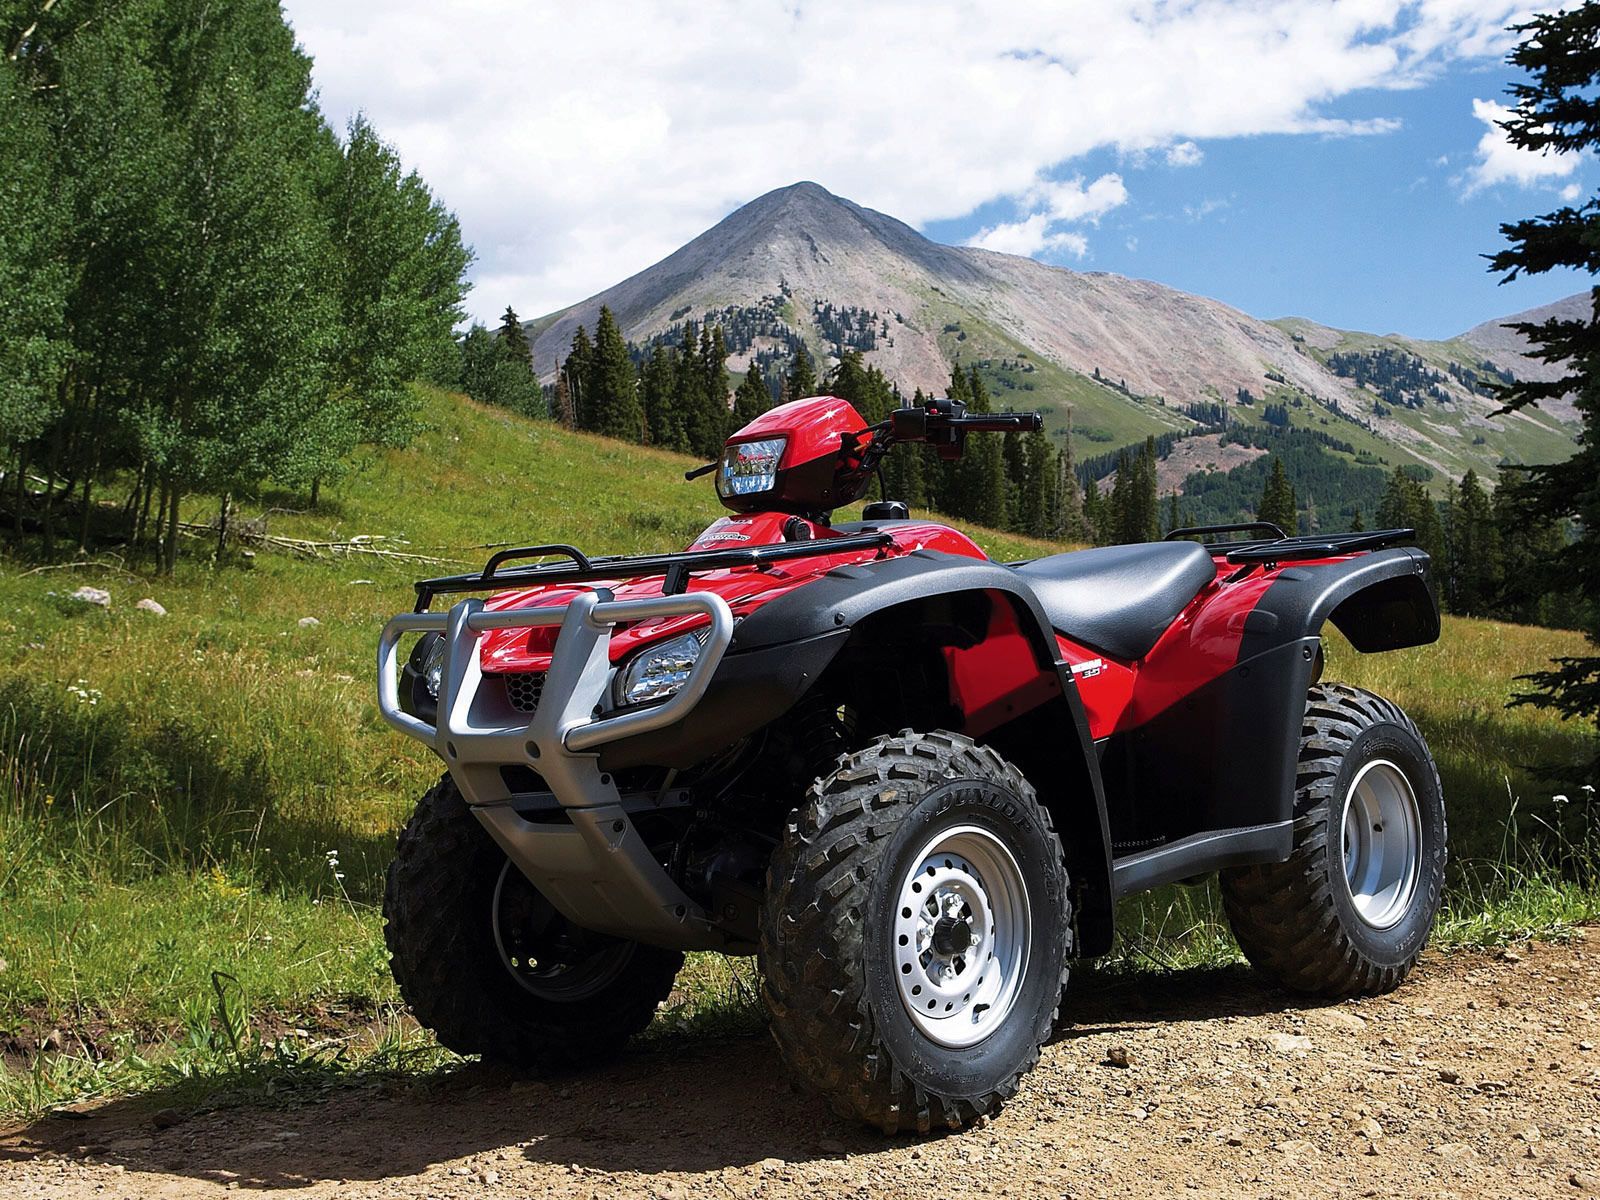 ATV wallpaper, specifications, insurance, dealers, lawyers.: 2007